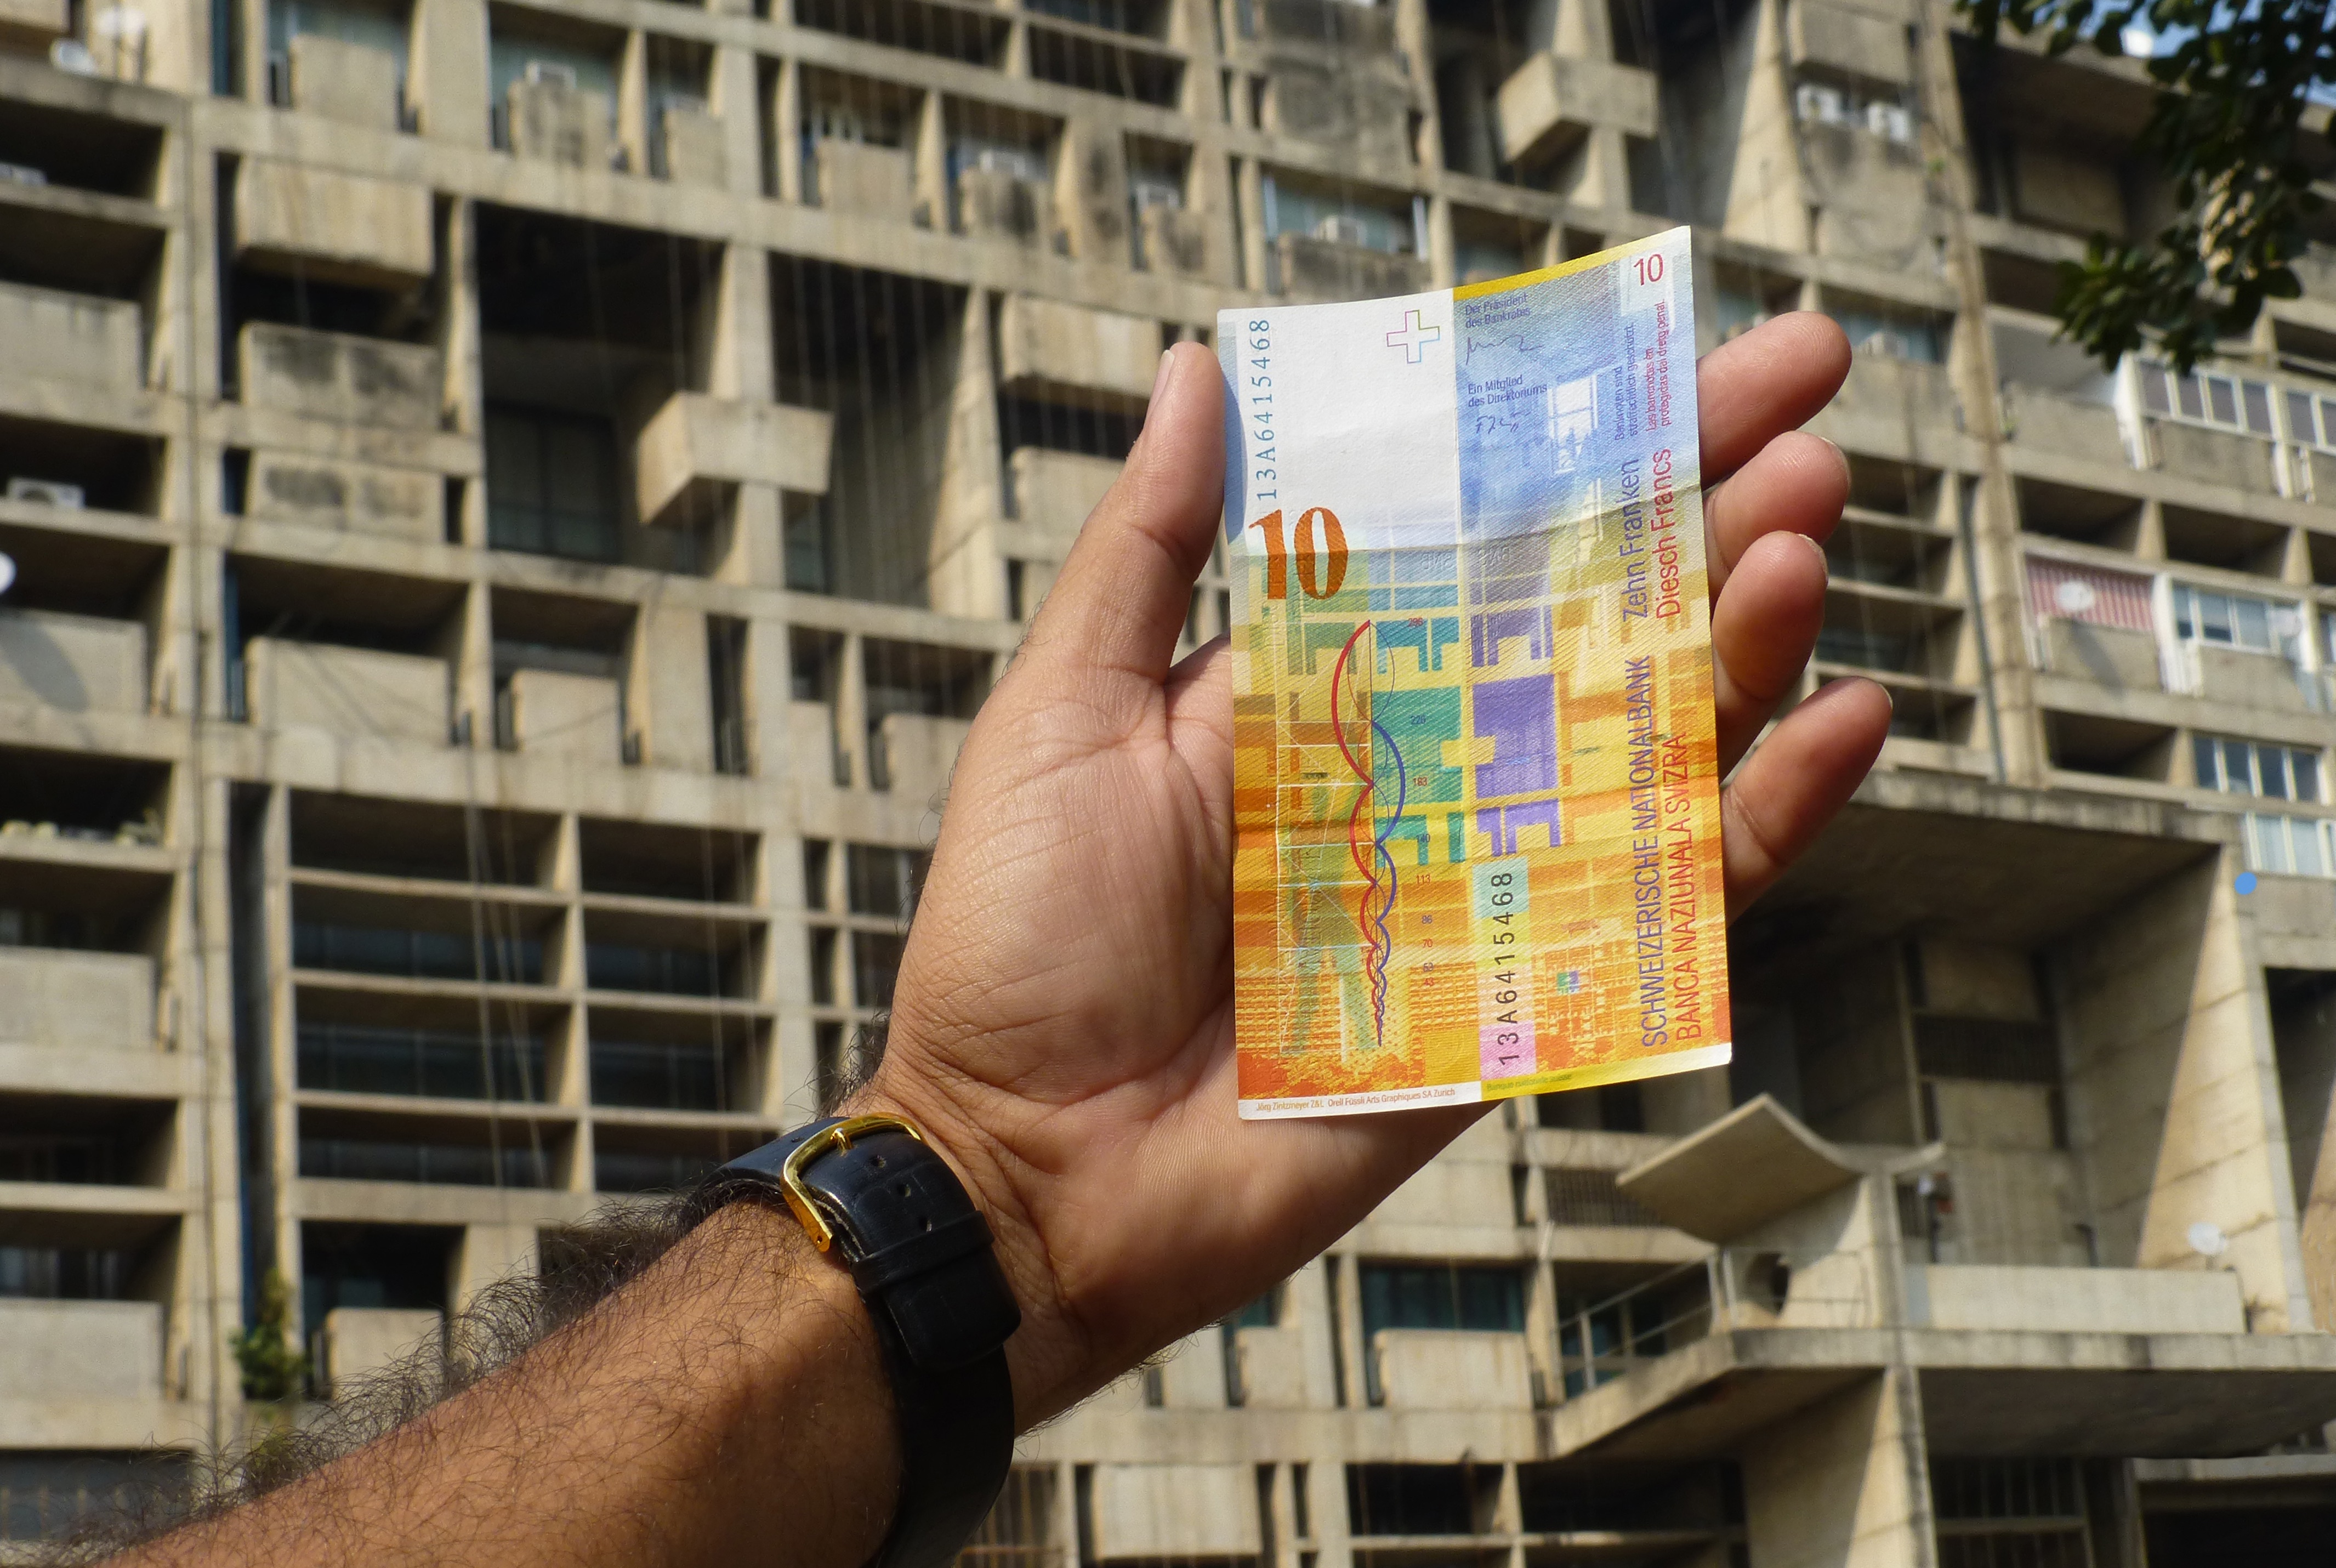 The Power of Utopia – Living with Le Corbusier in Chandigarh